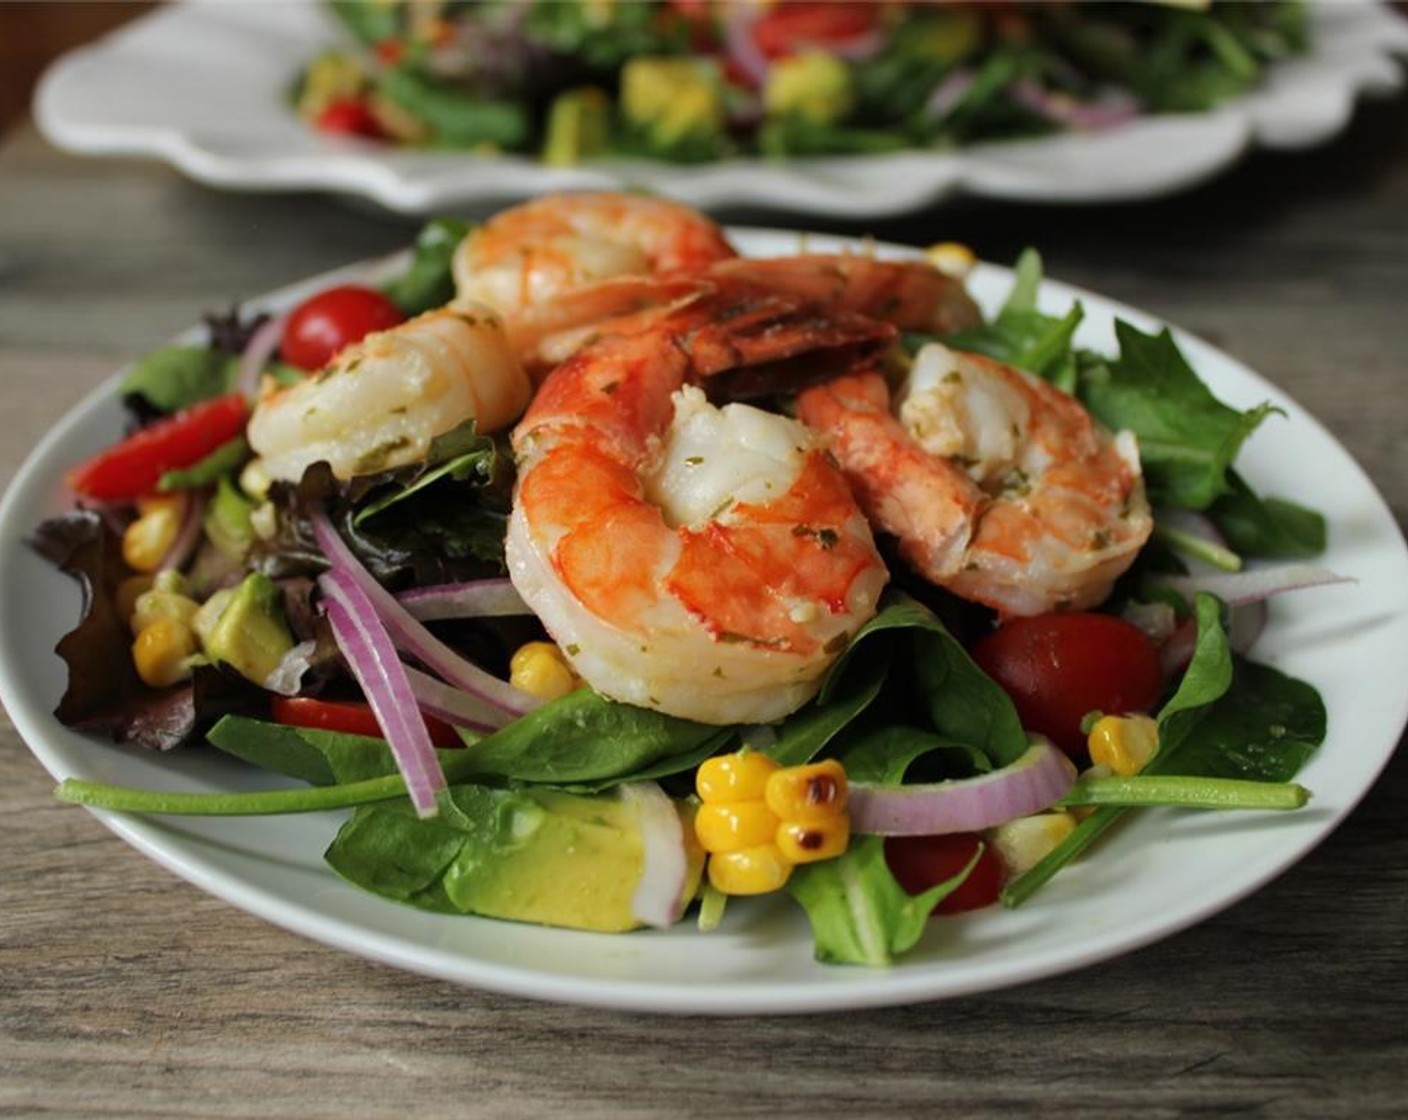 step 10 Just before serving, add the reserved dressing and toss to coat. Top with grilled shrimp and get after it.